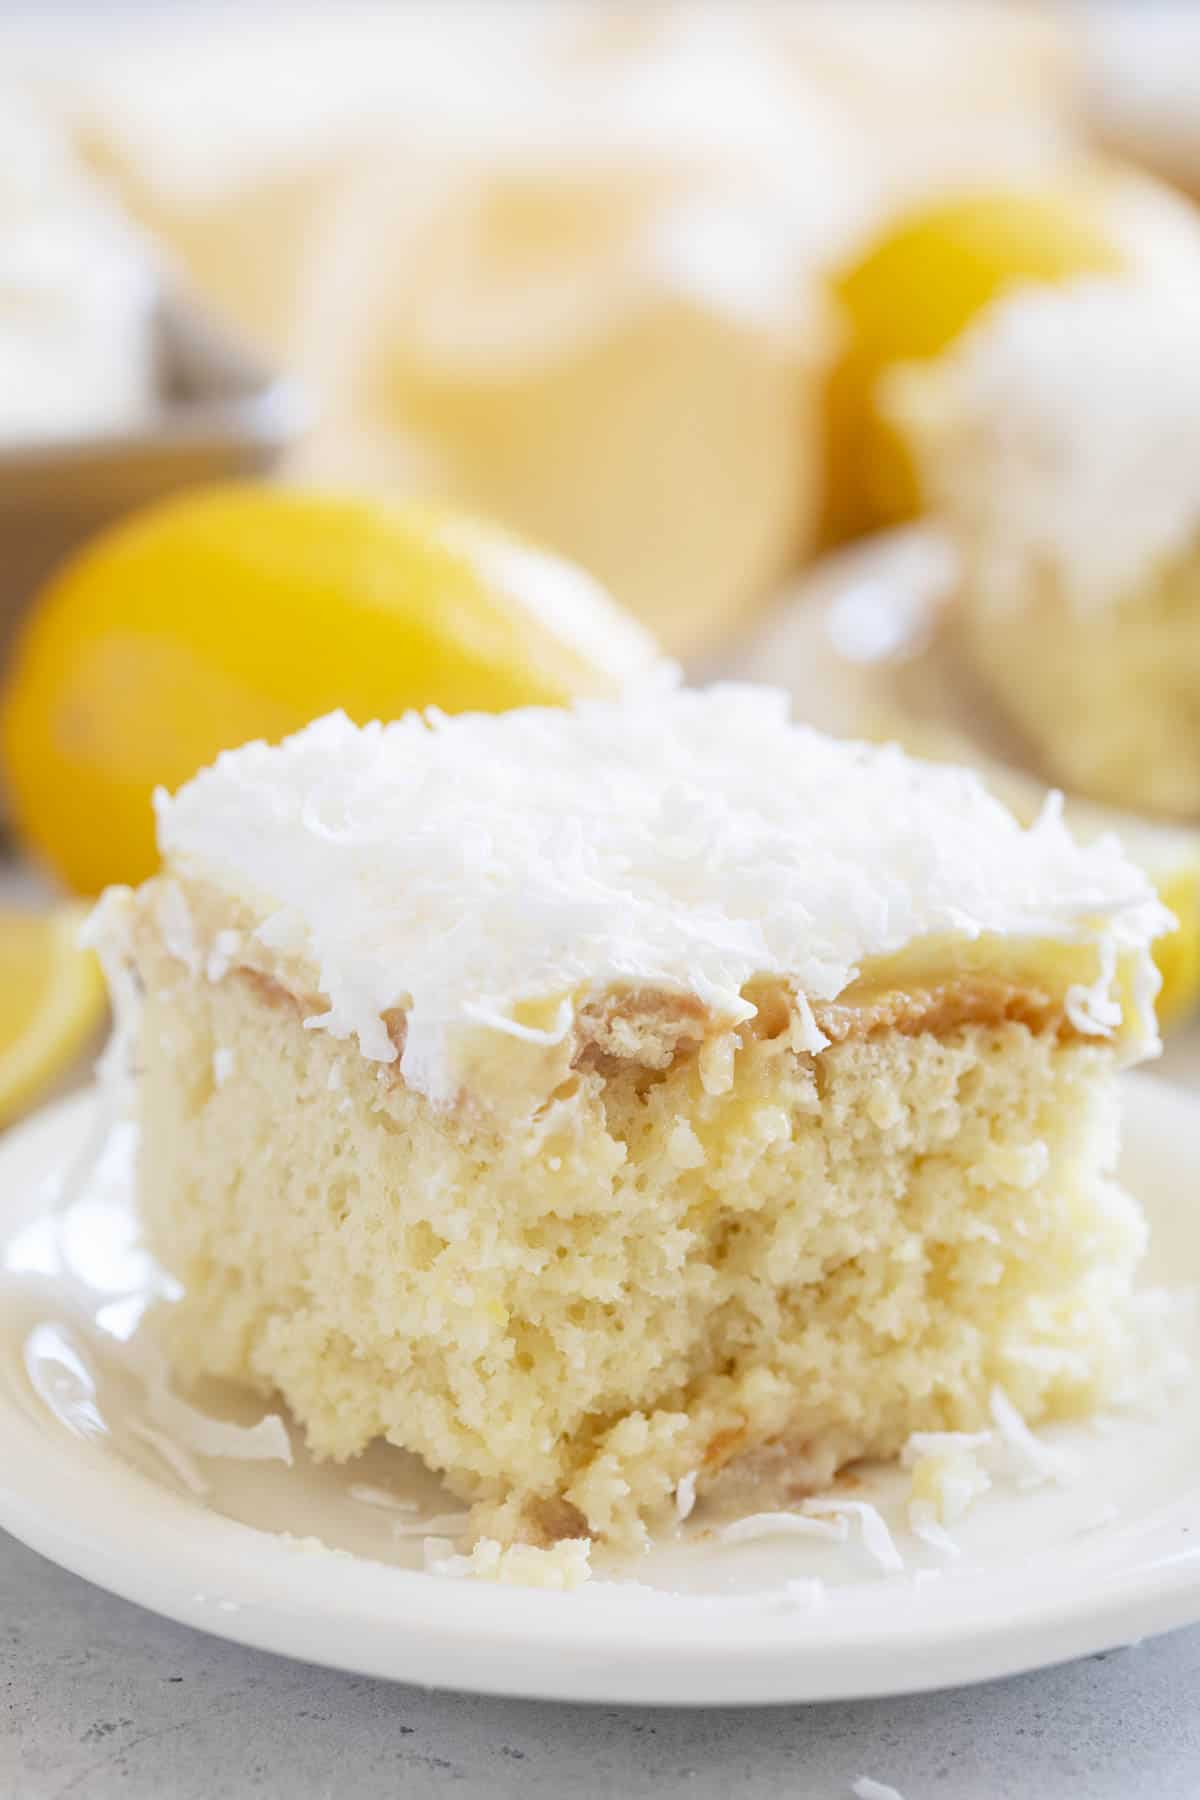 Slice of Lemon Poke Cake with Coconut on a white plate.